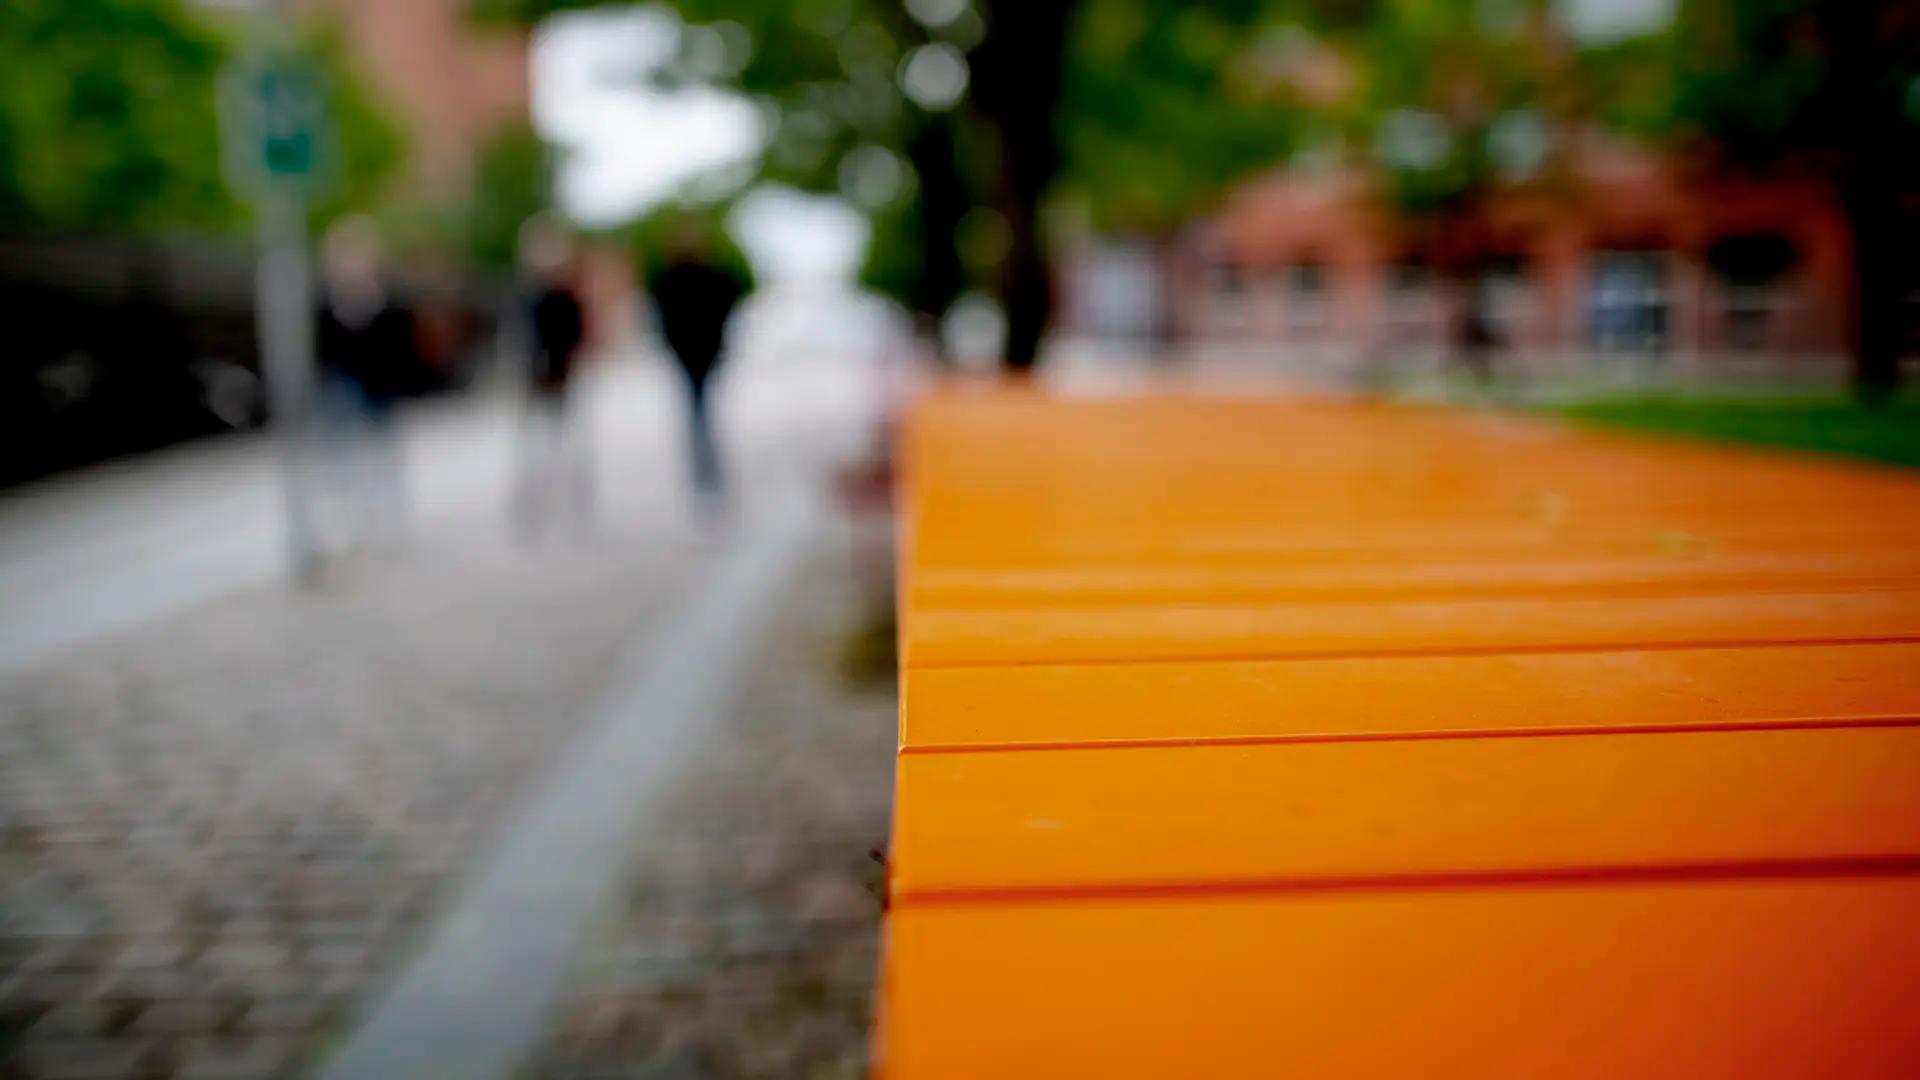 Outdoor close-up of a bench